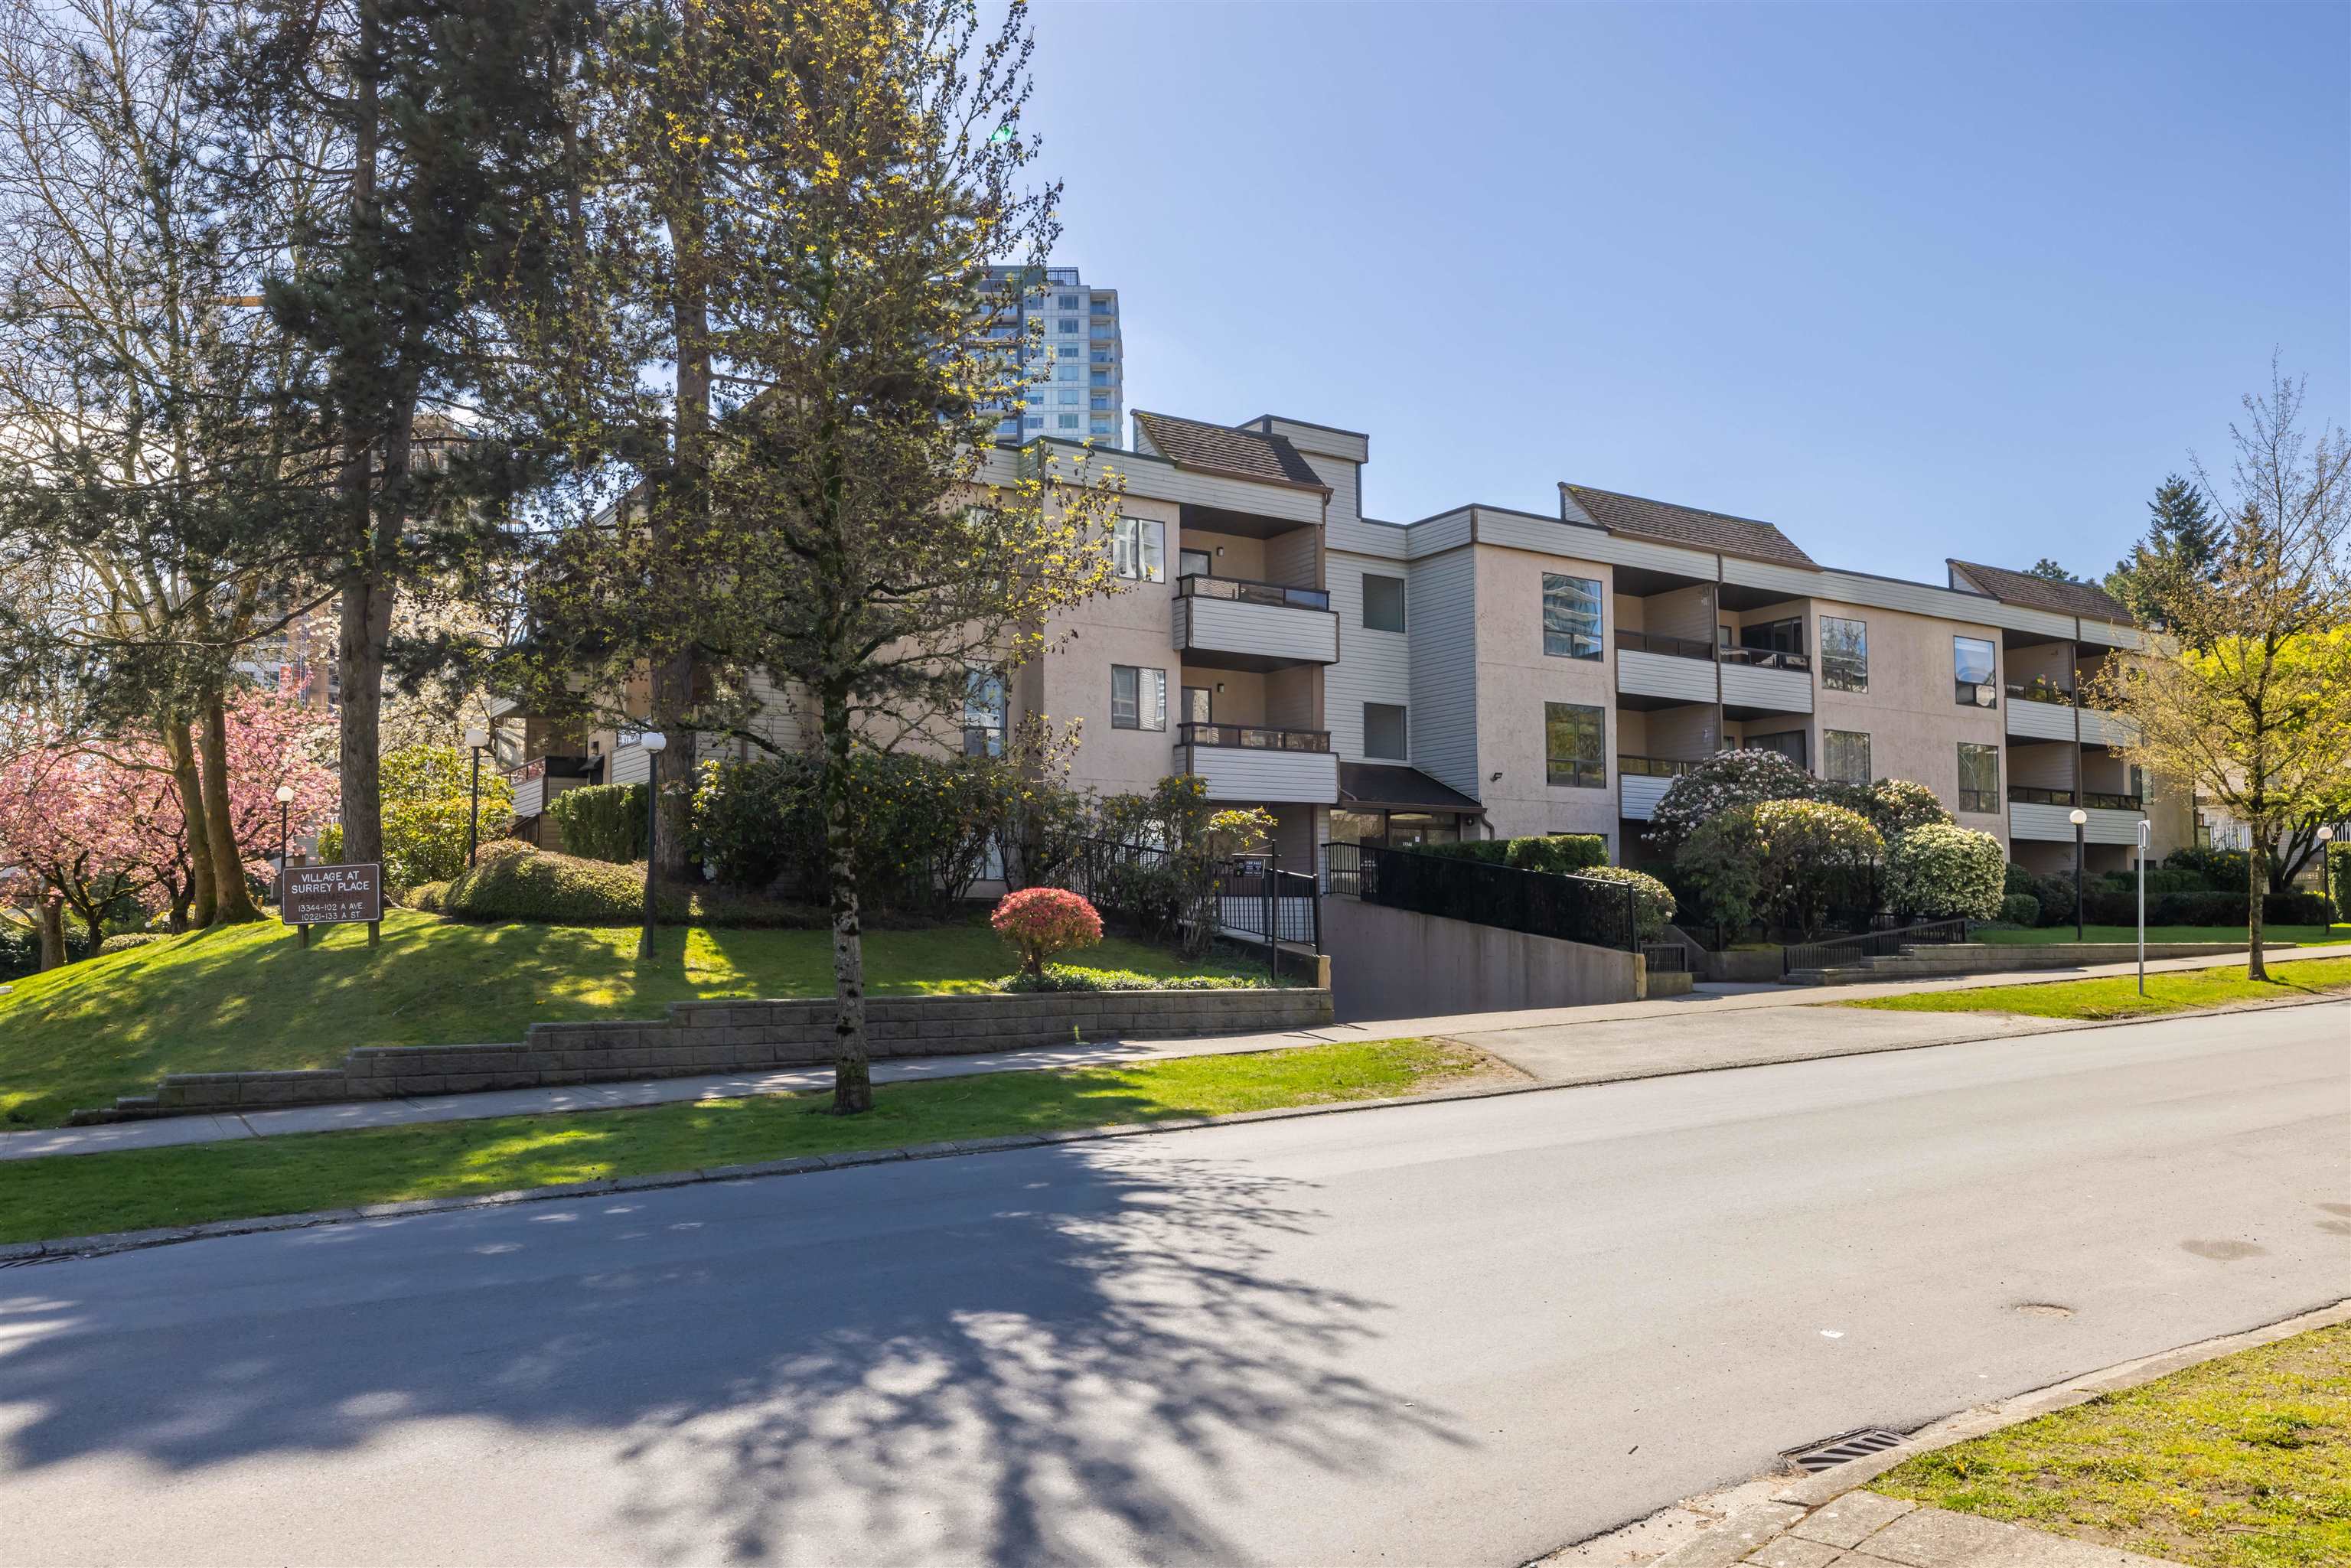 13344 102A, Surrey, British Columbia V3T 5J7, 1 Bedroom Bedrooms, ,1 BathroomBathrooms,Residential Attached,For Sale,102A,R2871713